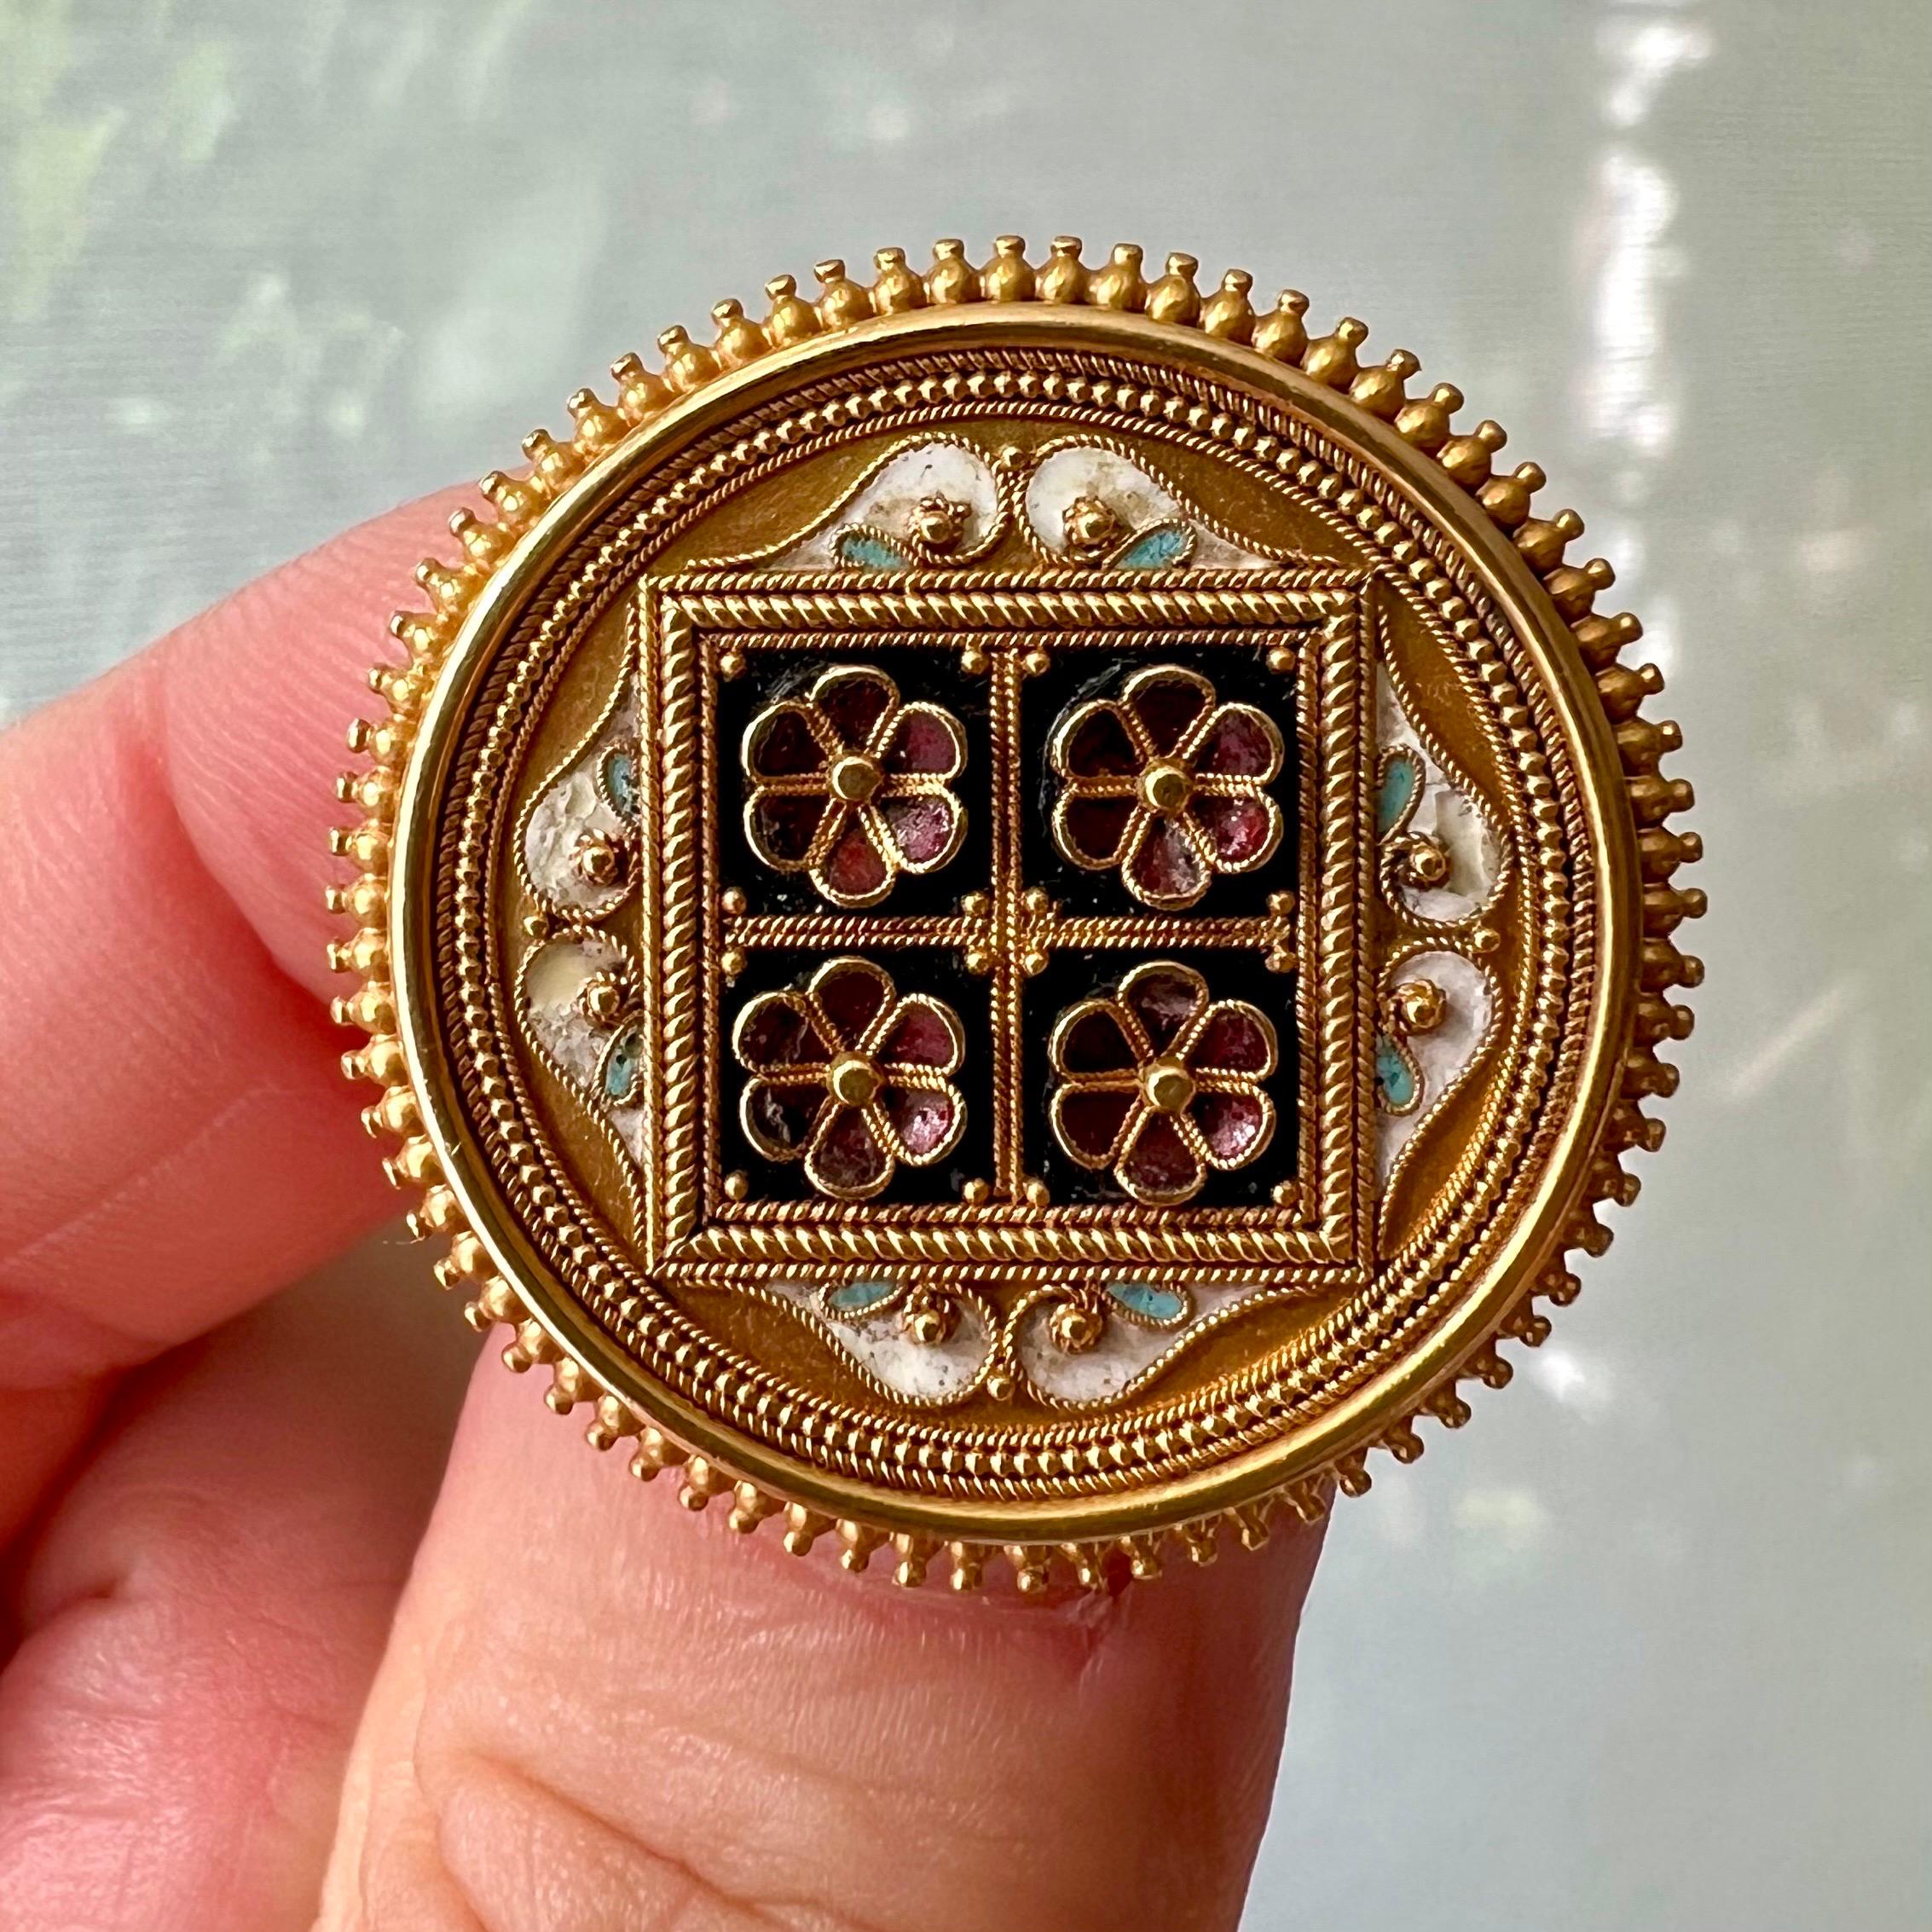 This is an antique round Etruscan Revival brooch made of 14 karat gold, decorated with an Art Nouveau floral motif of four flowers in a square with burgundy colored enamel petals. The brooch is inlaid with different colors of enamel, such as white,